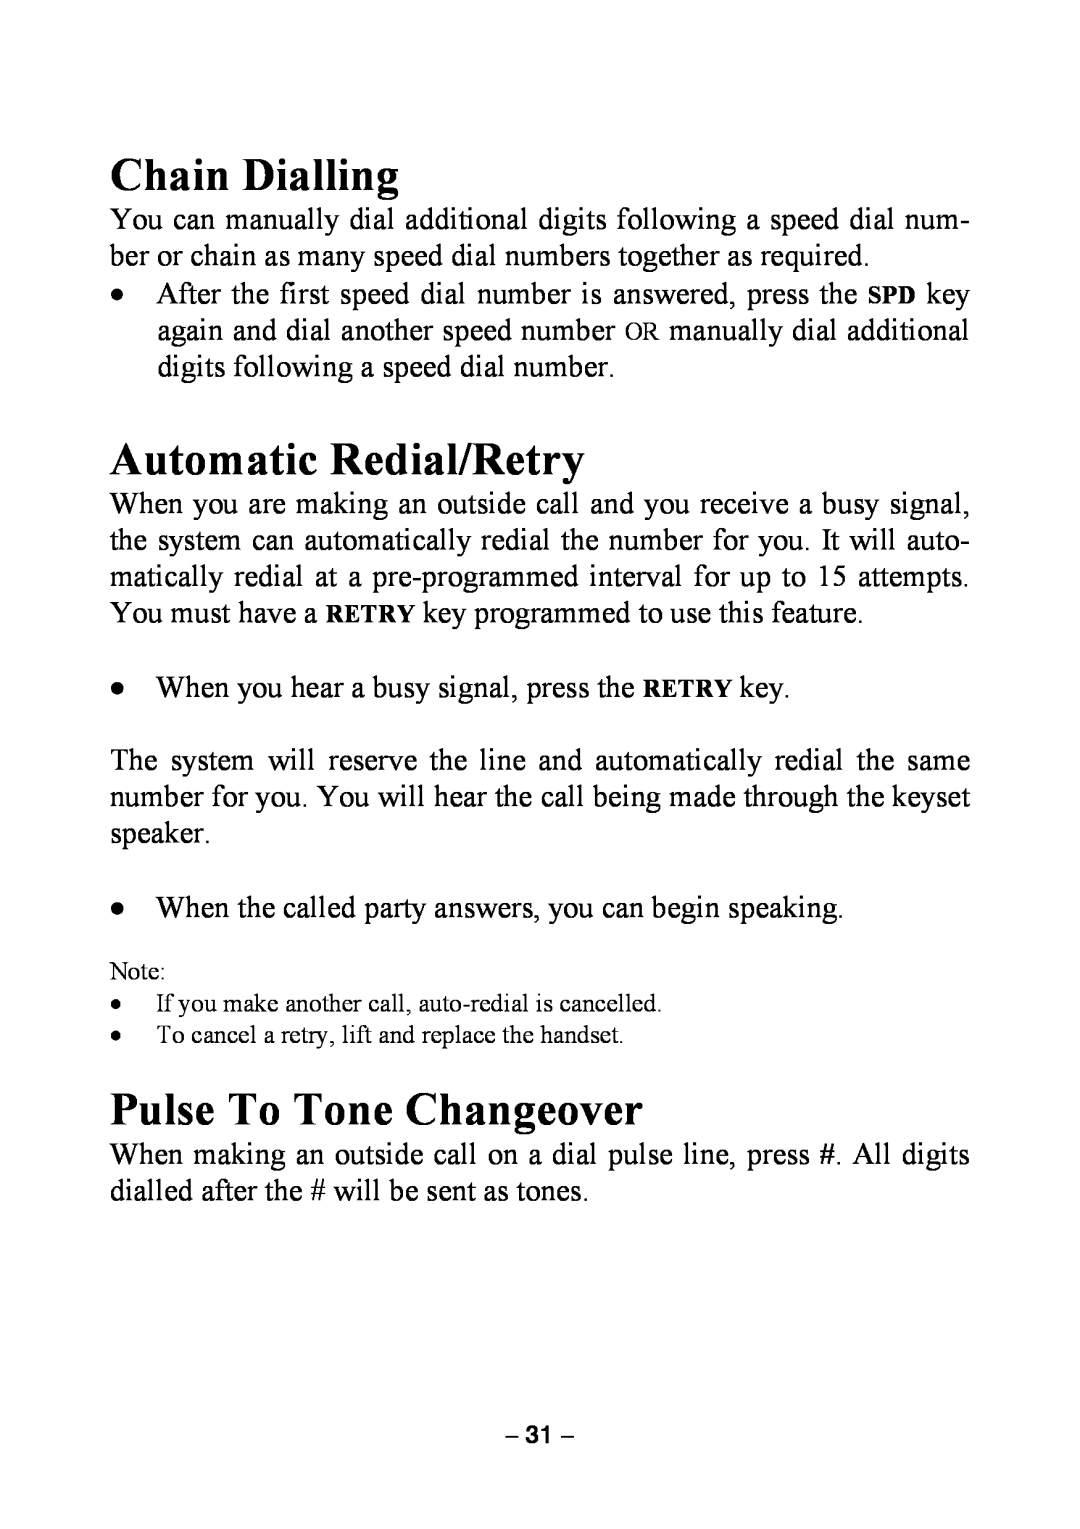 Samsung DCS KEYSET manual Chain Dialling, Automatic Redial/Retry, Pulse To Tone Changeover 